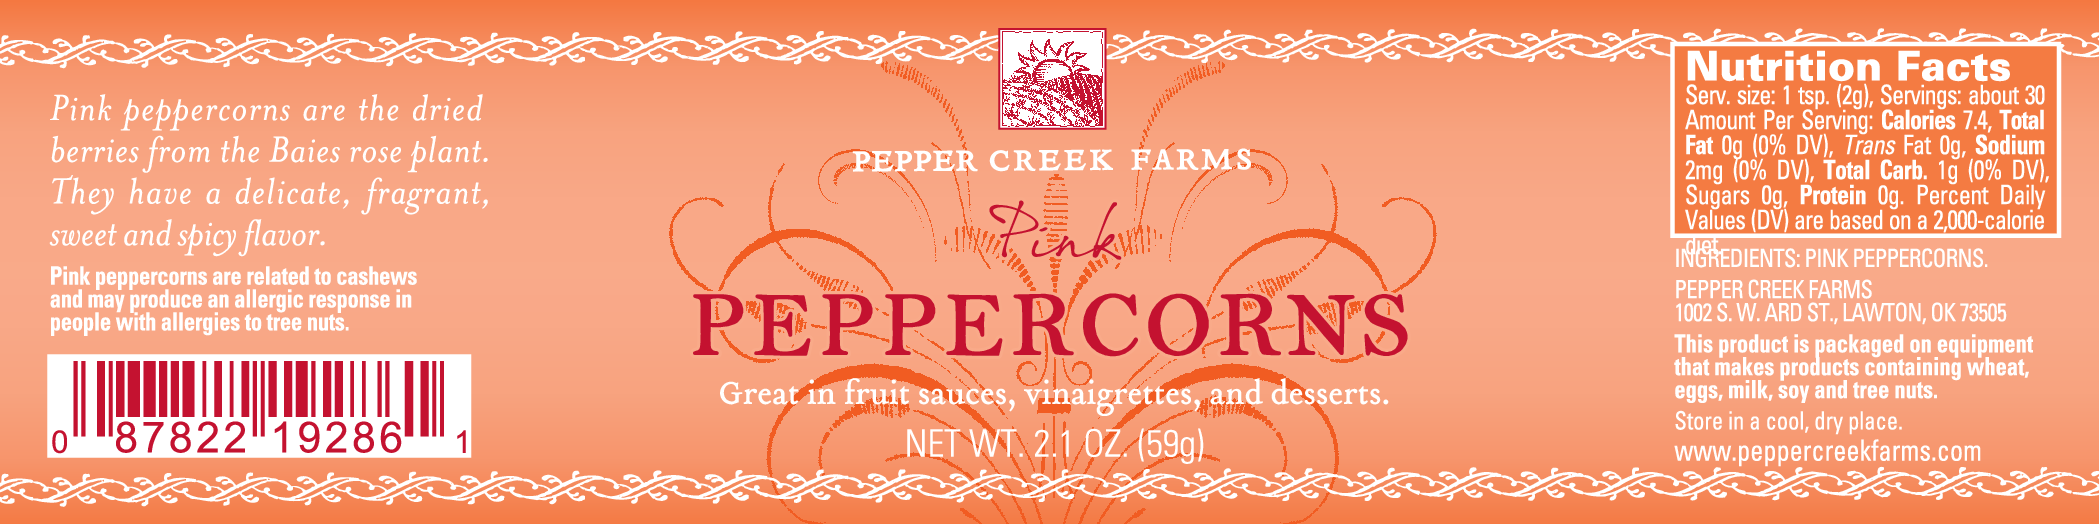 Pcf Med Of Pink Peppercorn Out